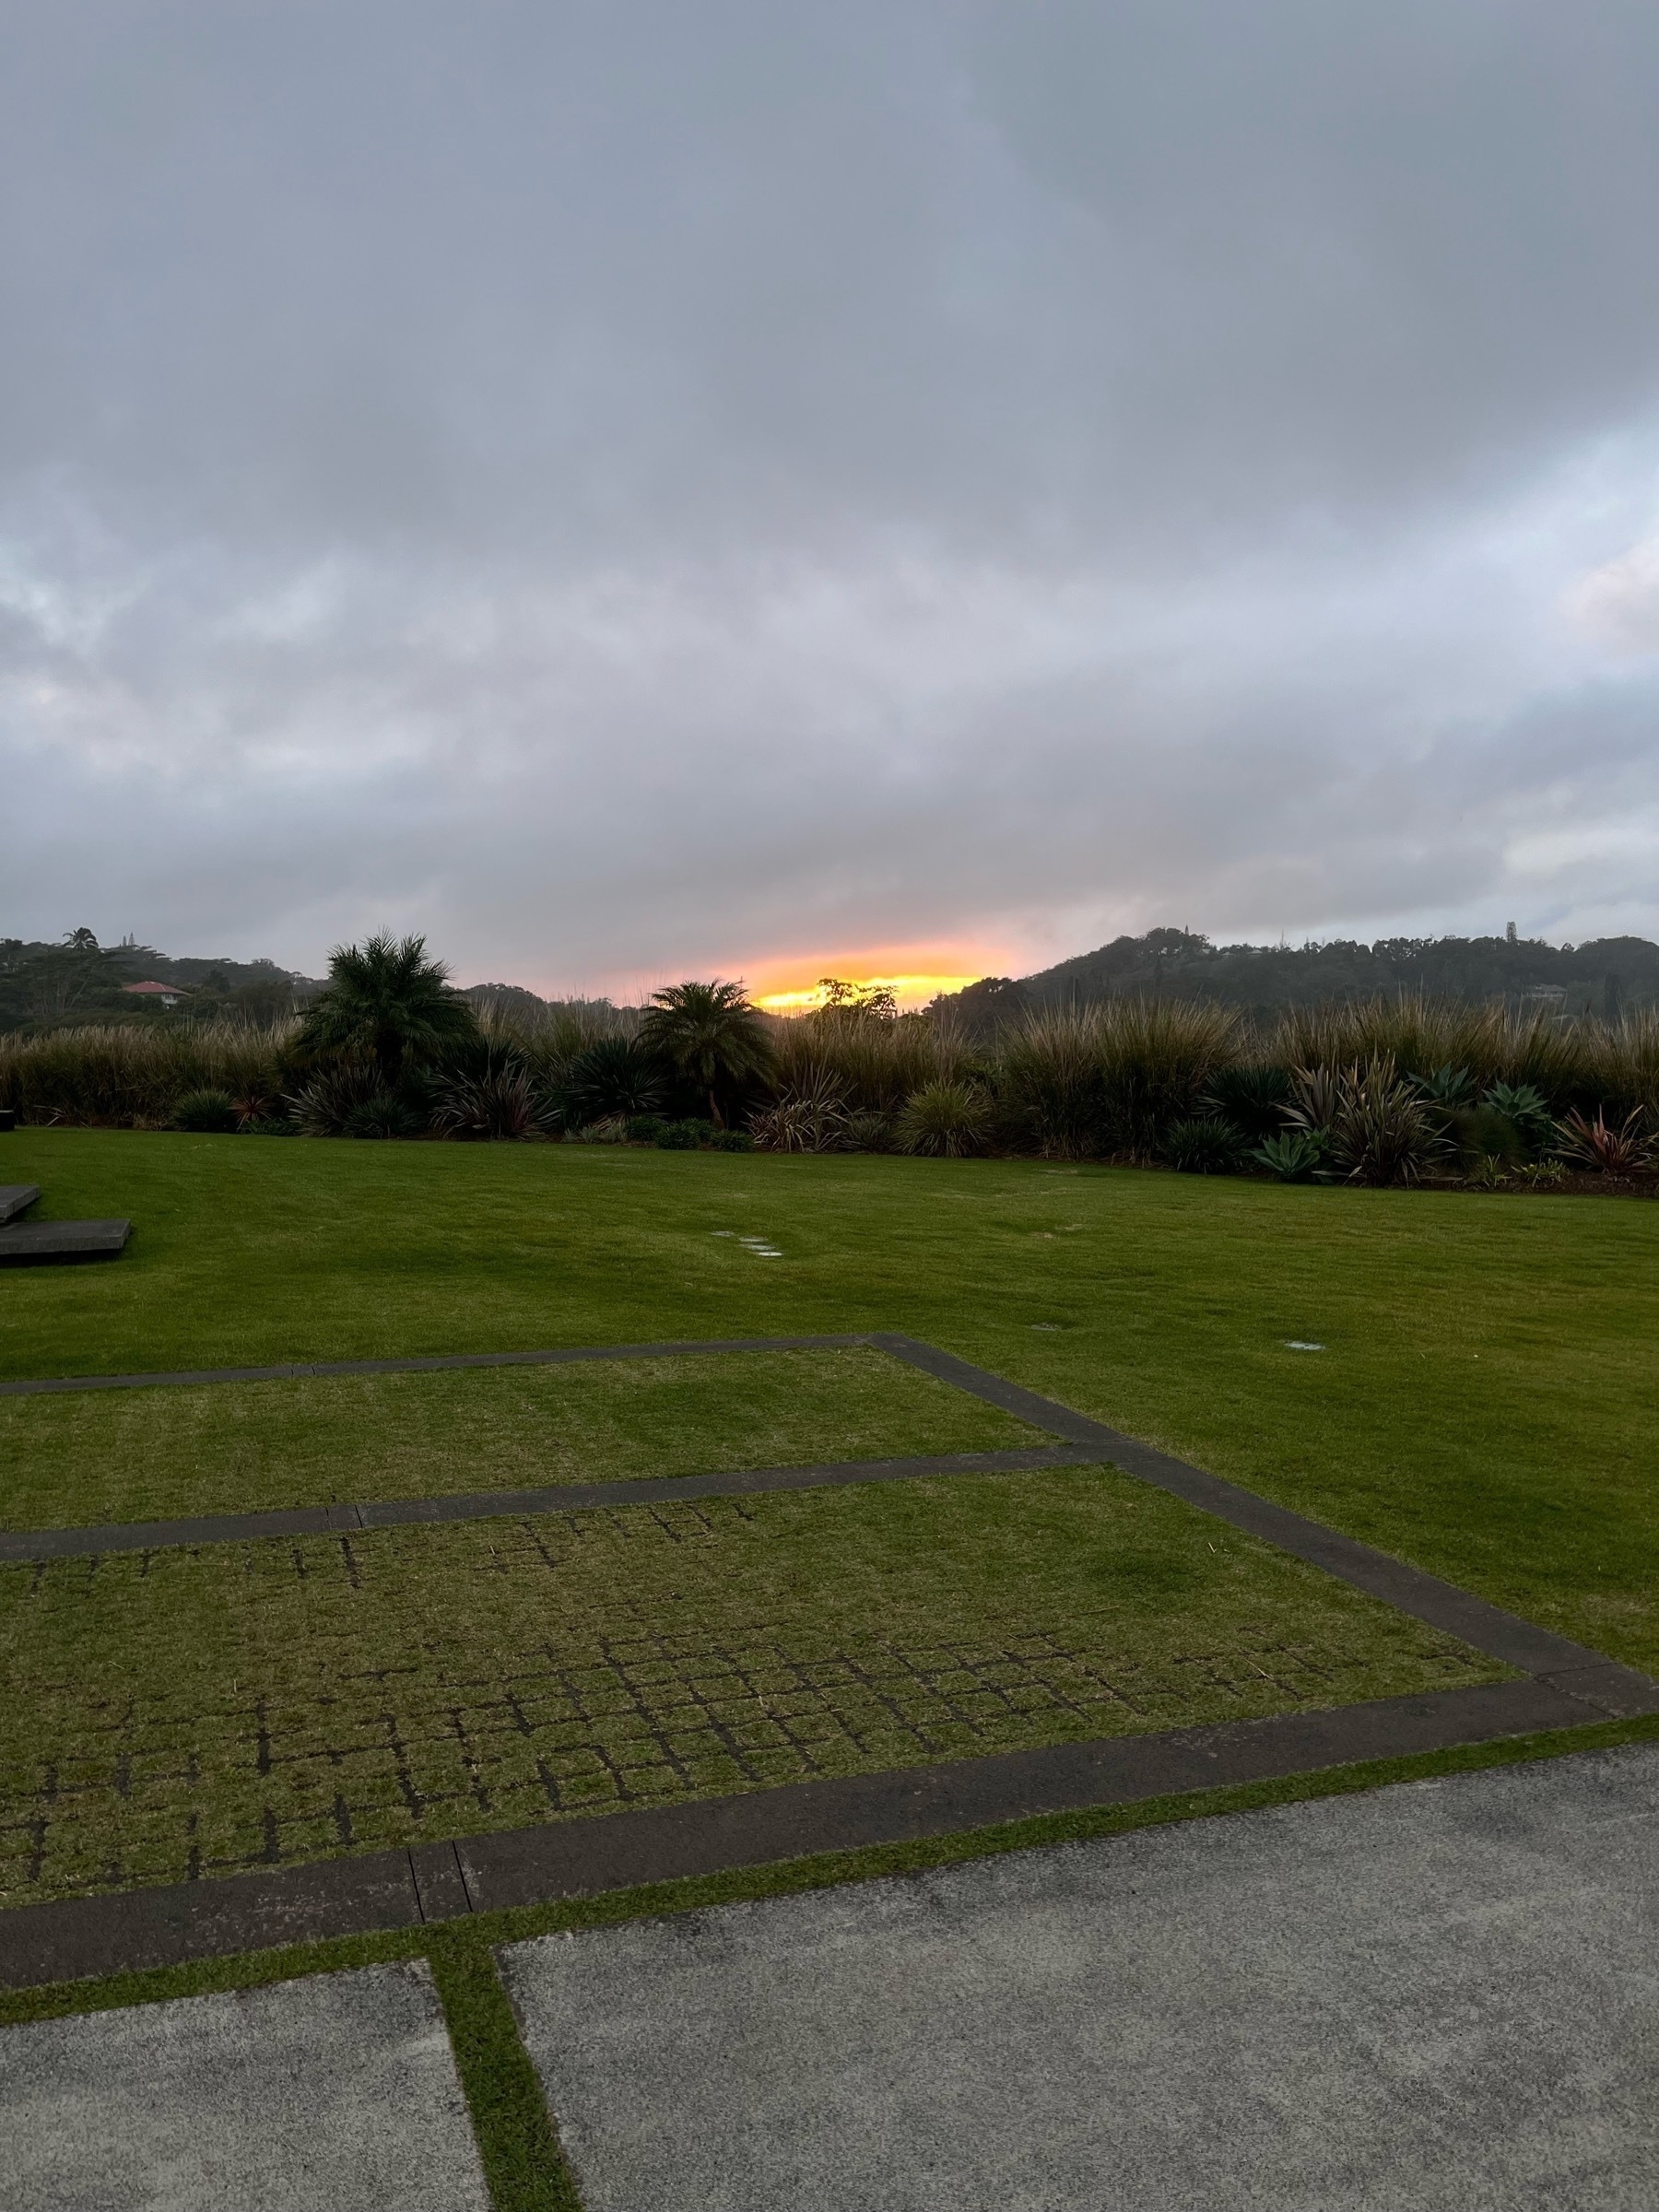 A late winter evening. A lawn and been in the foreground. Tree covered hills in the distance. Low clouds, with a break in the cloud where the sky meets the hill, the setting sun shining through